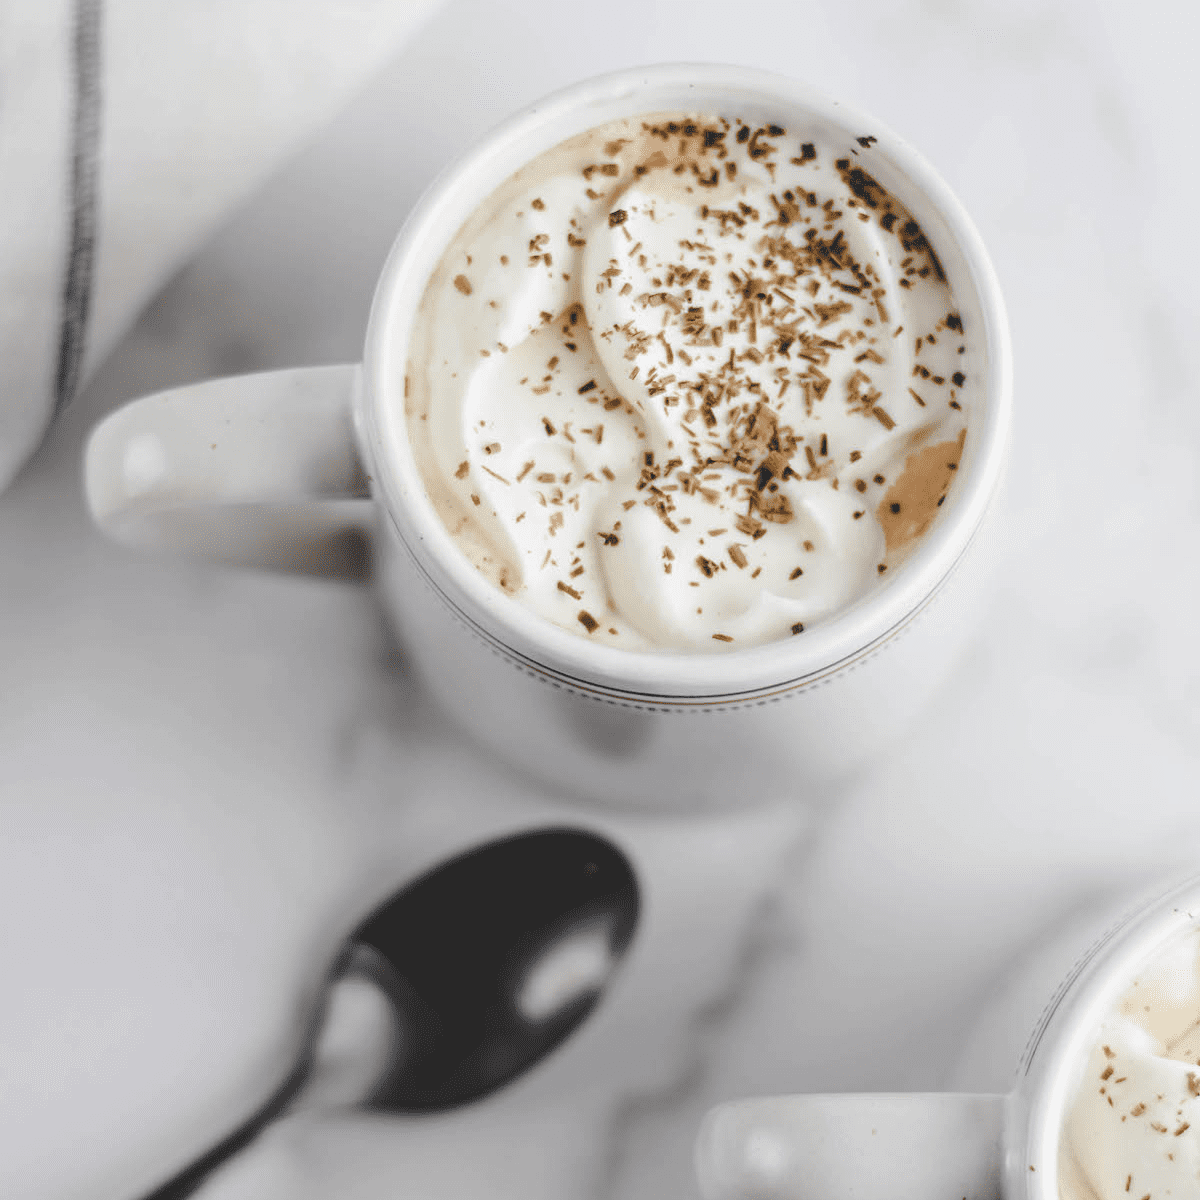 How To Make A Latte At Home With Coffee Machine